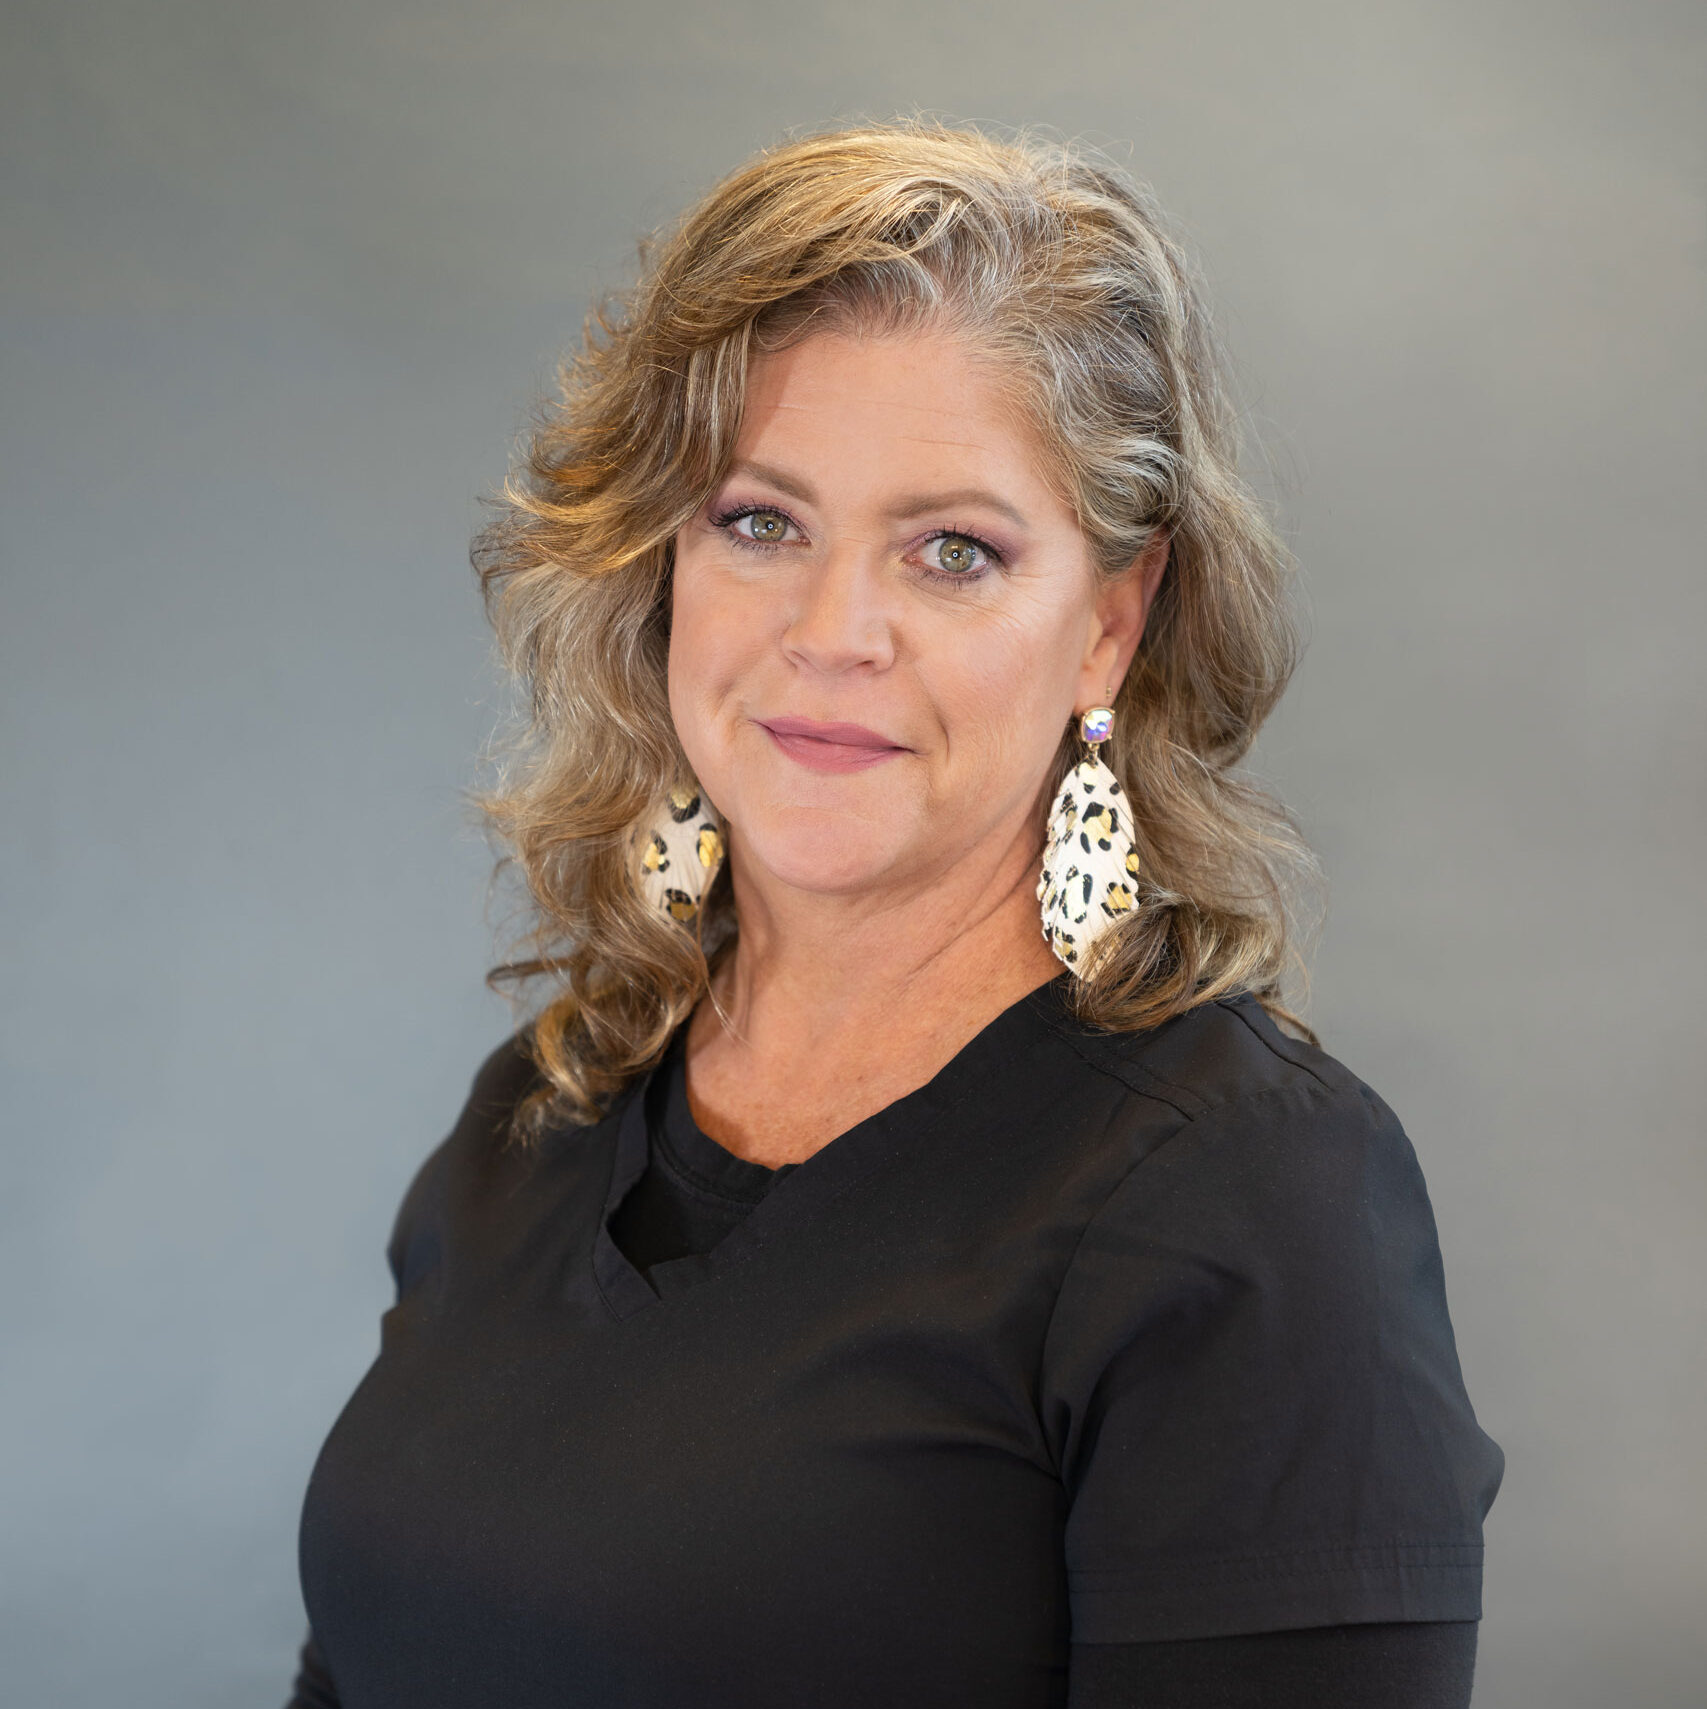 Kim Dunaway is a board-certified Nurse Practitioner. Kim is a graduate of the University of Tennessee and Carson Newman. Kim worked in Family Practice for 10 years then moved to GI in 2012 seeing all GI-related conditions, specializing in Hepatology including participation in research.